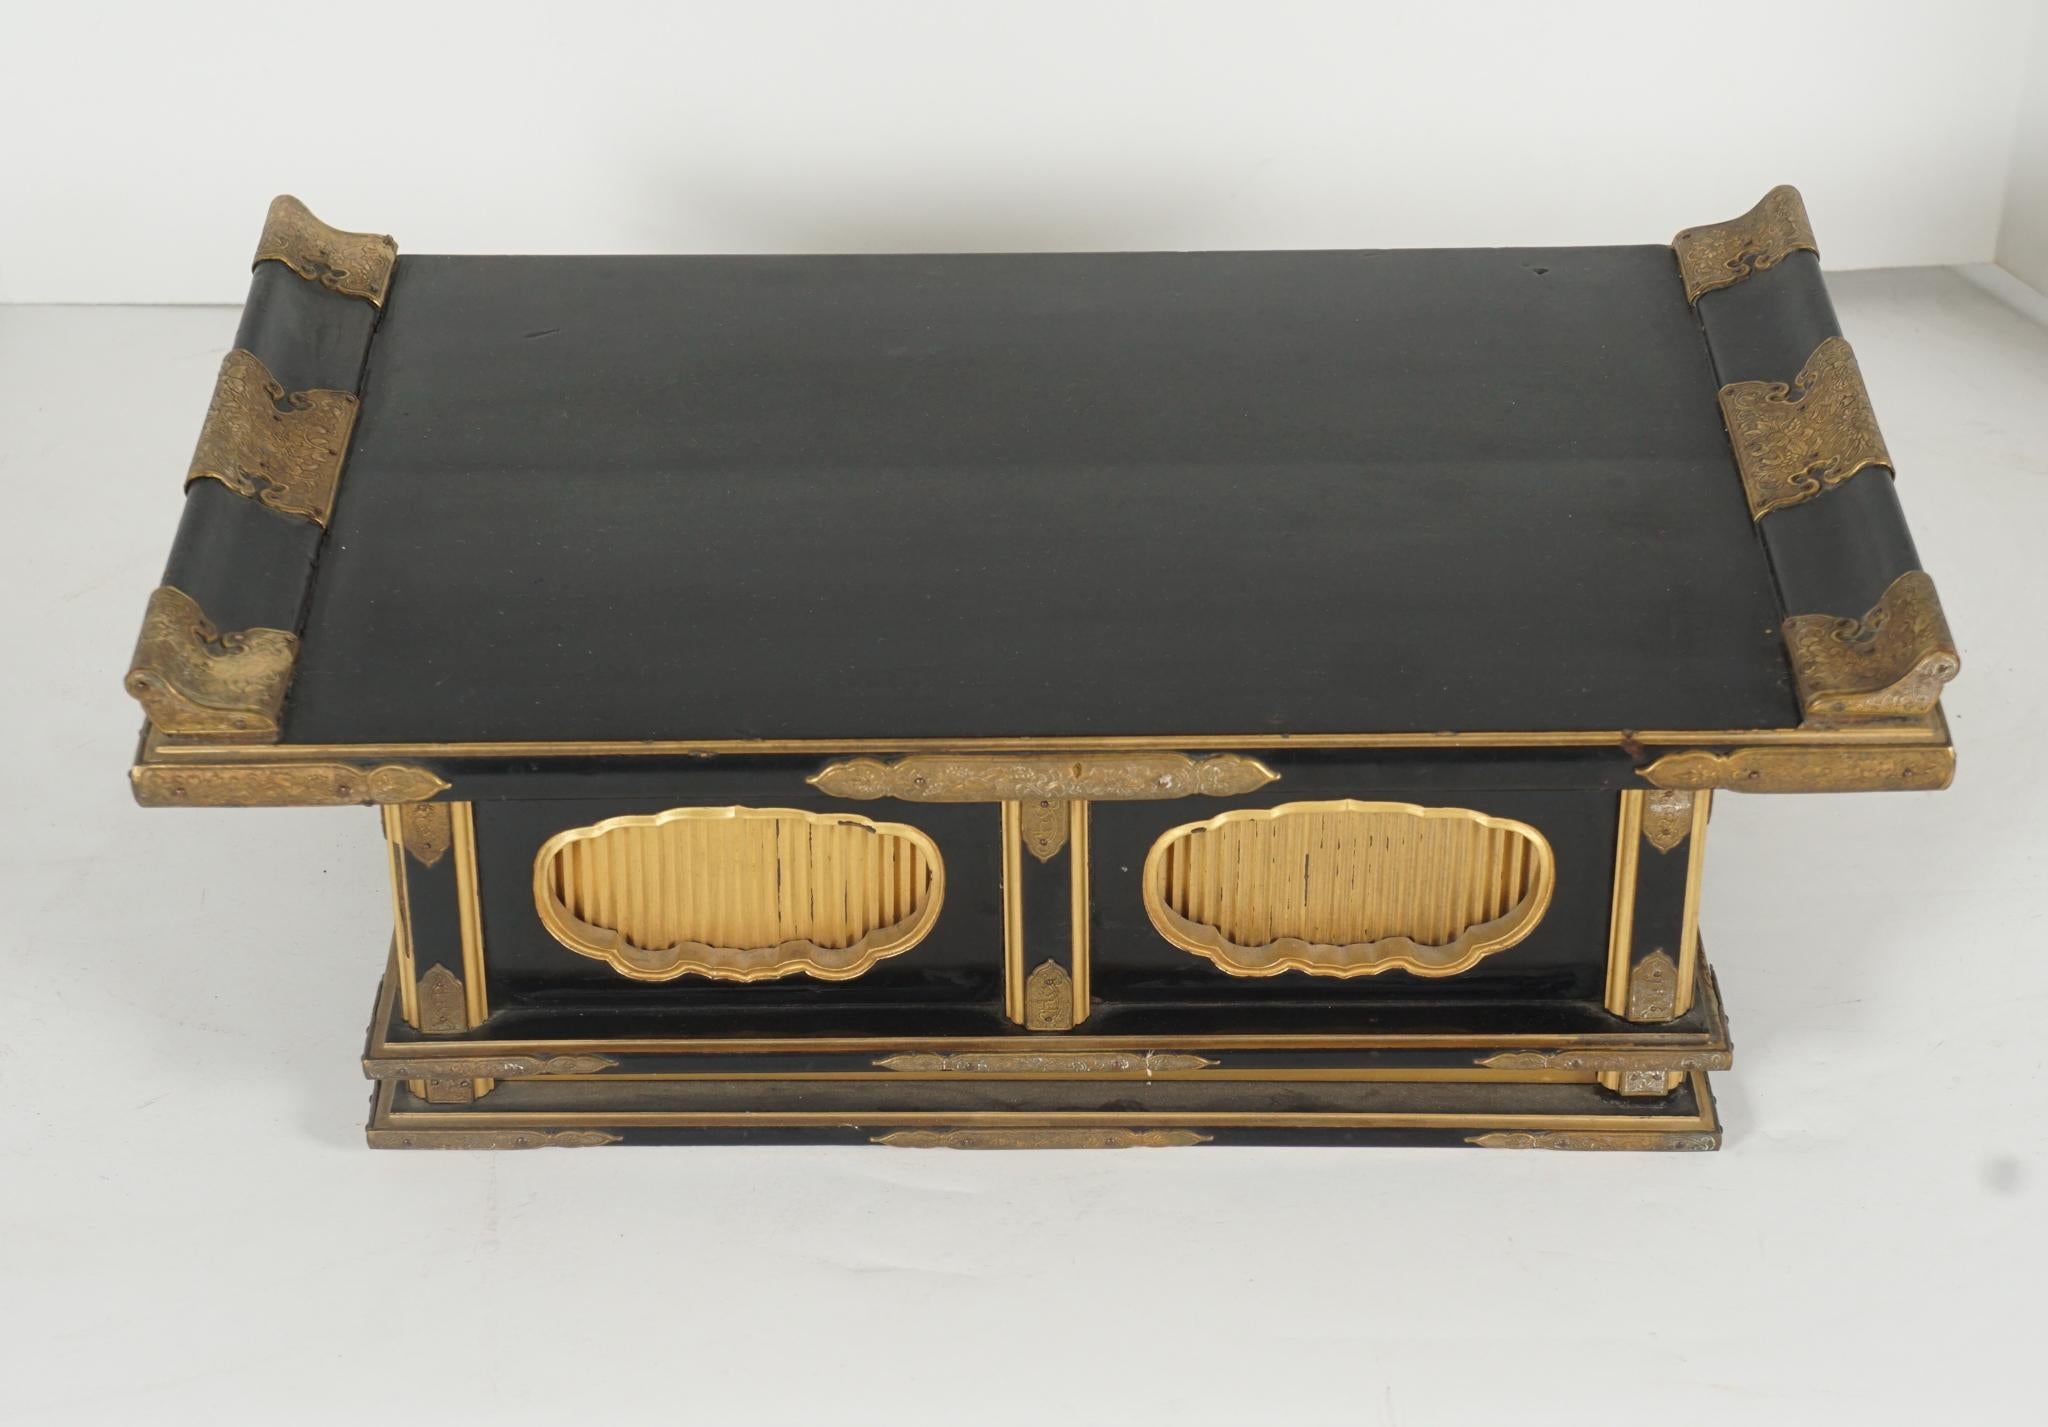 This small late 19th-century Meiji period altar or stand with gilded & engraved brass mounts is a refined example of the art of lacquer in Japan. Crafted of deep black shiny lacquer set out with simple gilded edges and rigged panels in gold lacquer